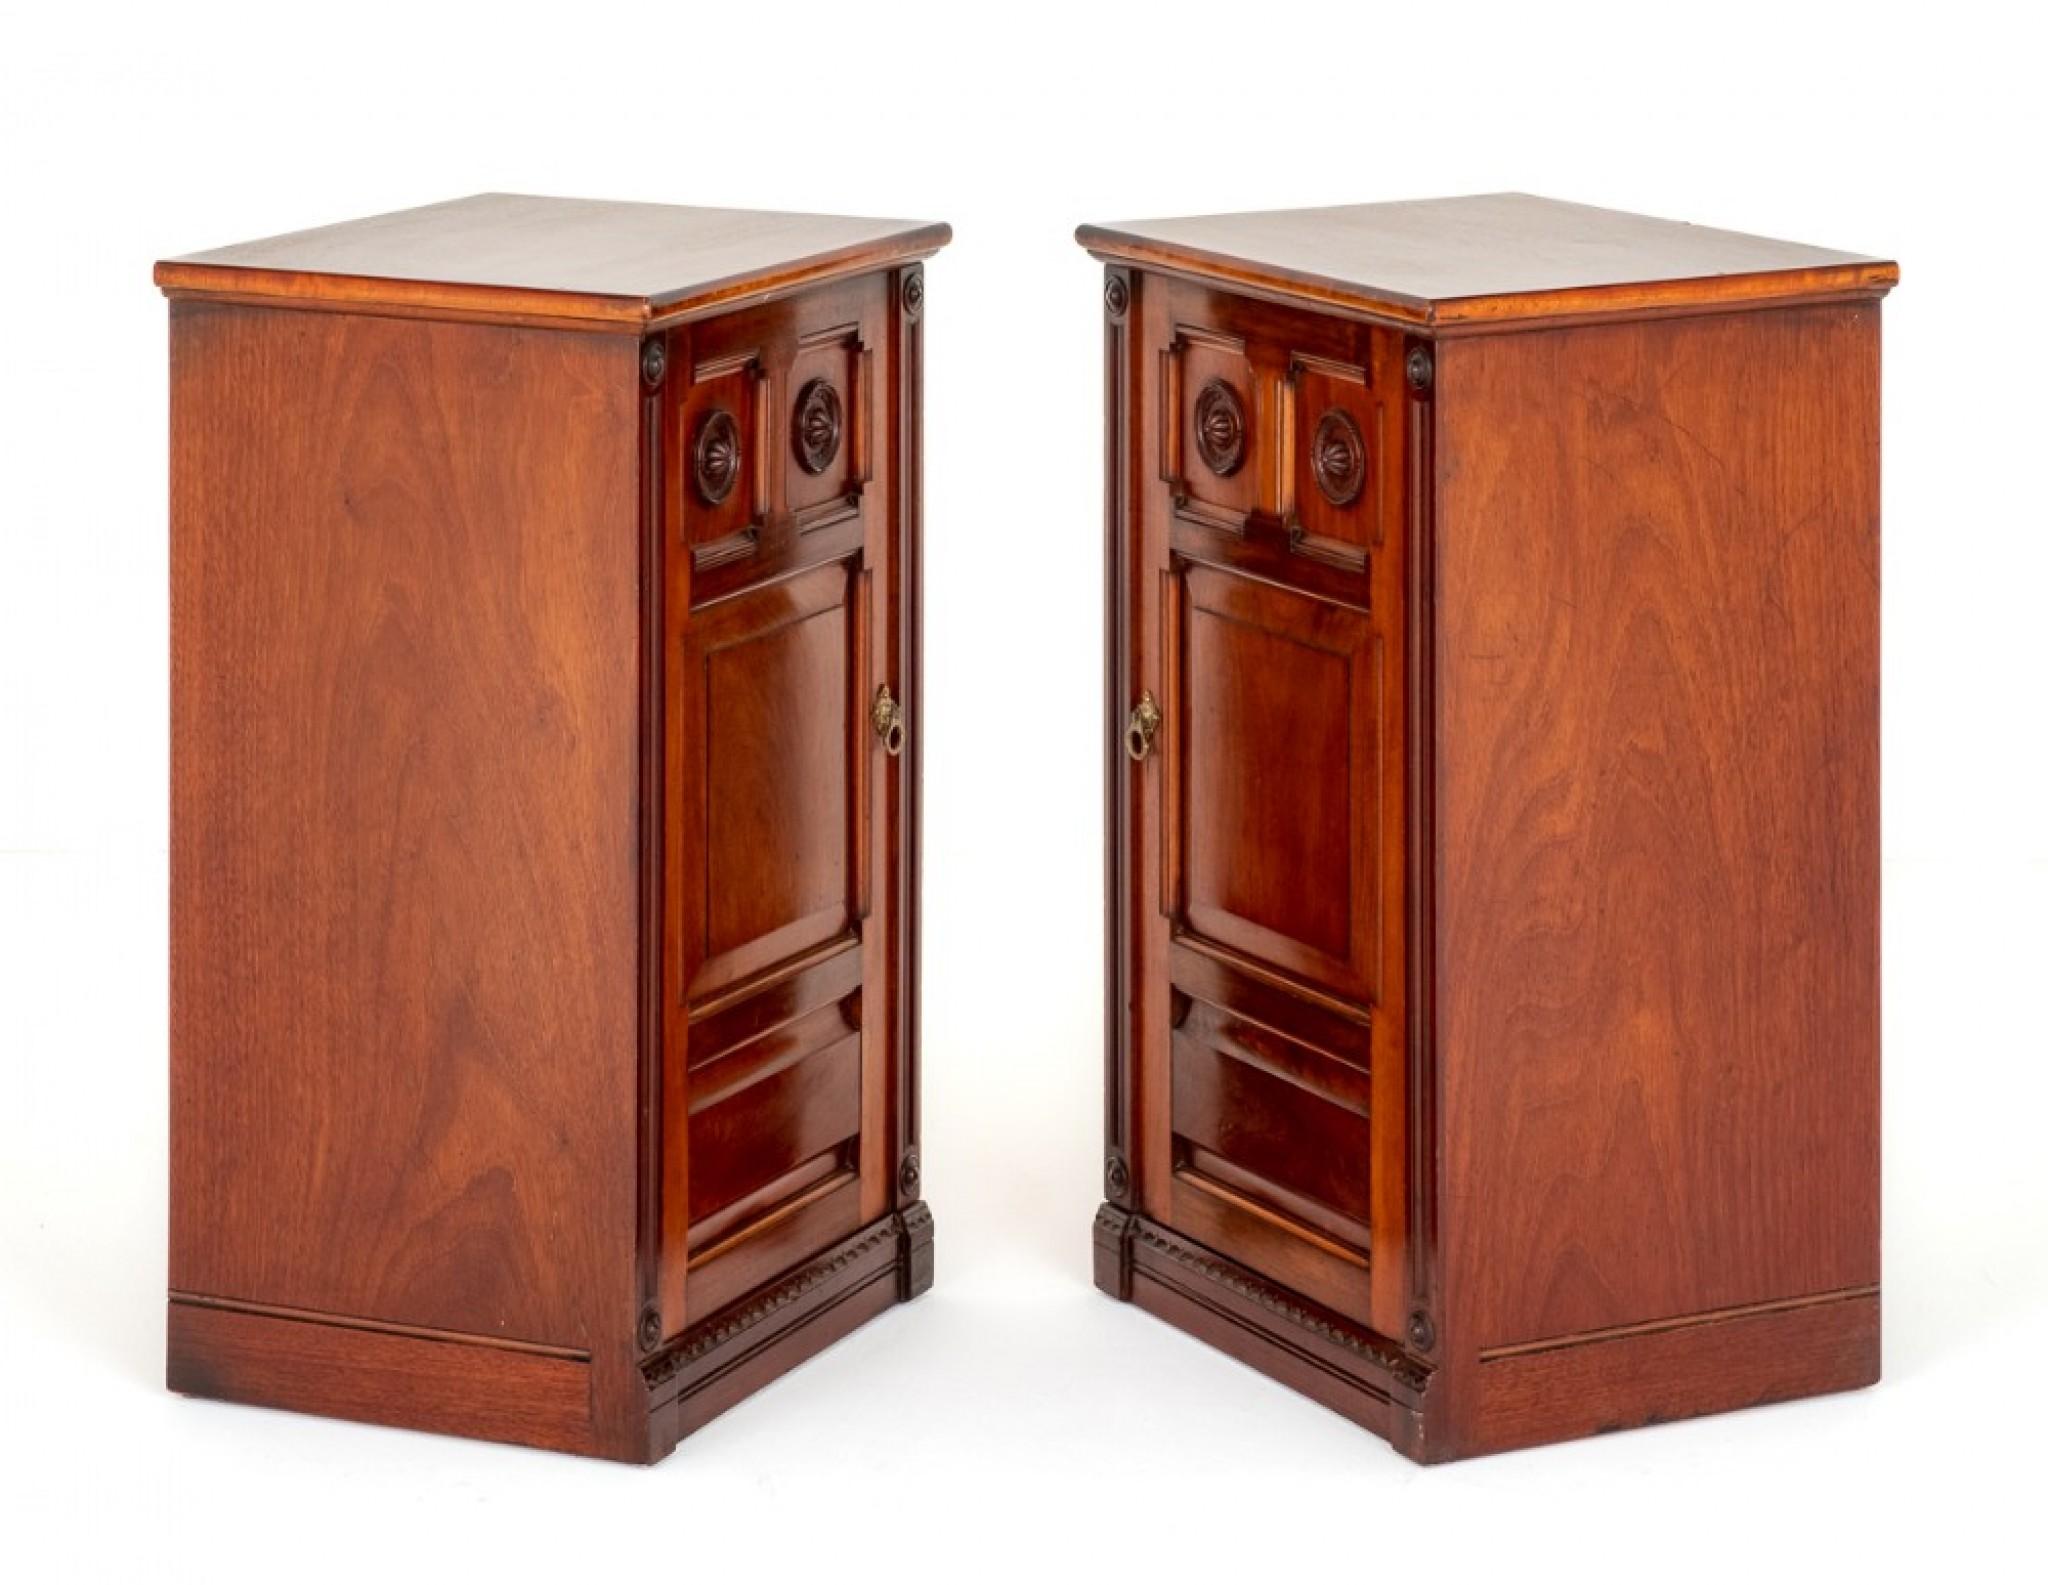 Pair of Arts and Crafts Style Mahogany Cabinets.
circa 1900
These Cabinets Feature Paneled Doors With Carved and Turned Rosettes to the Upper Panel.
The Doors are Flanked by Fluted Columns with Turned Patre.
Presented in Good Condition.